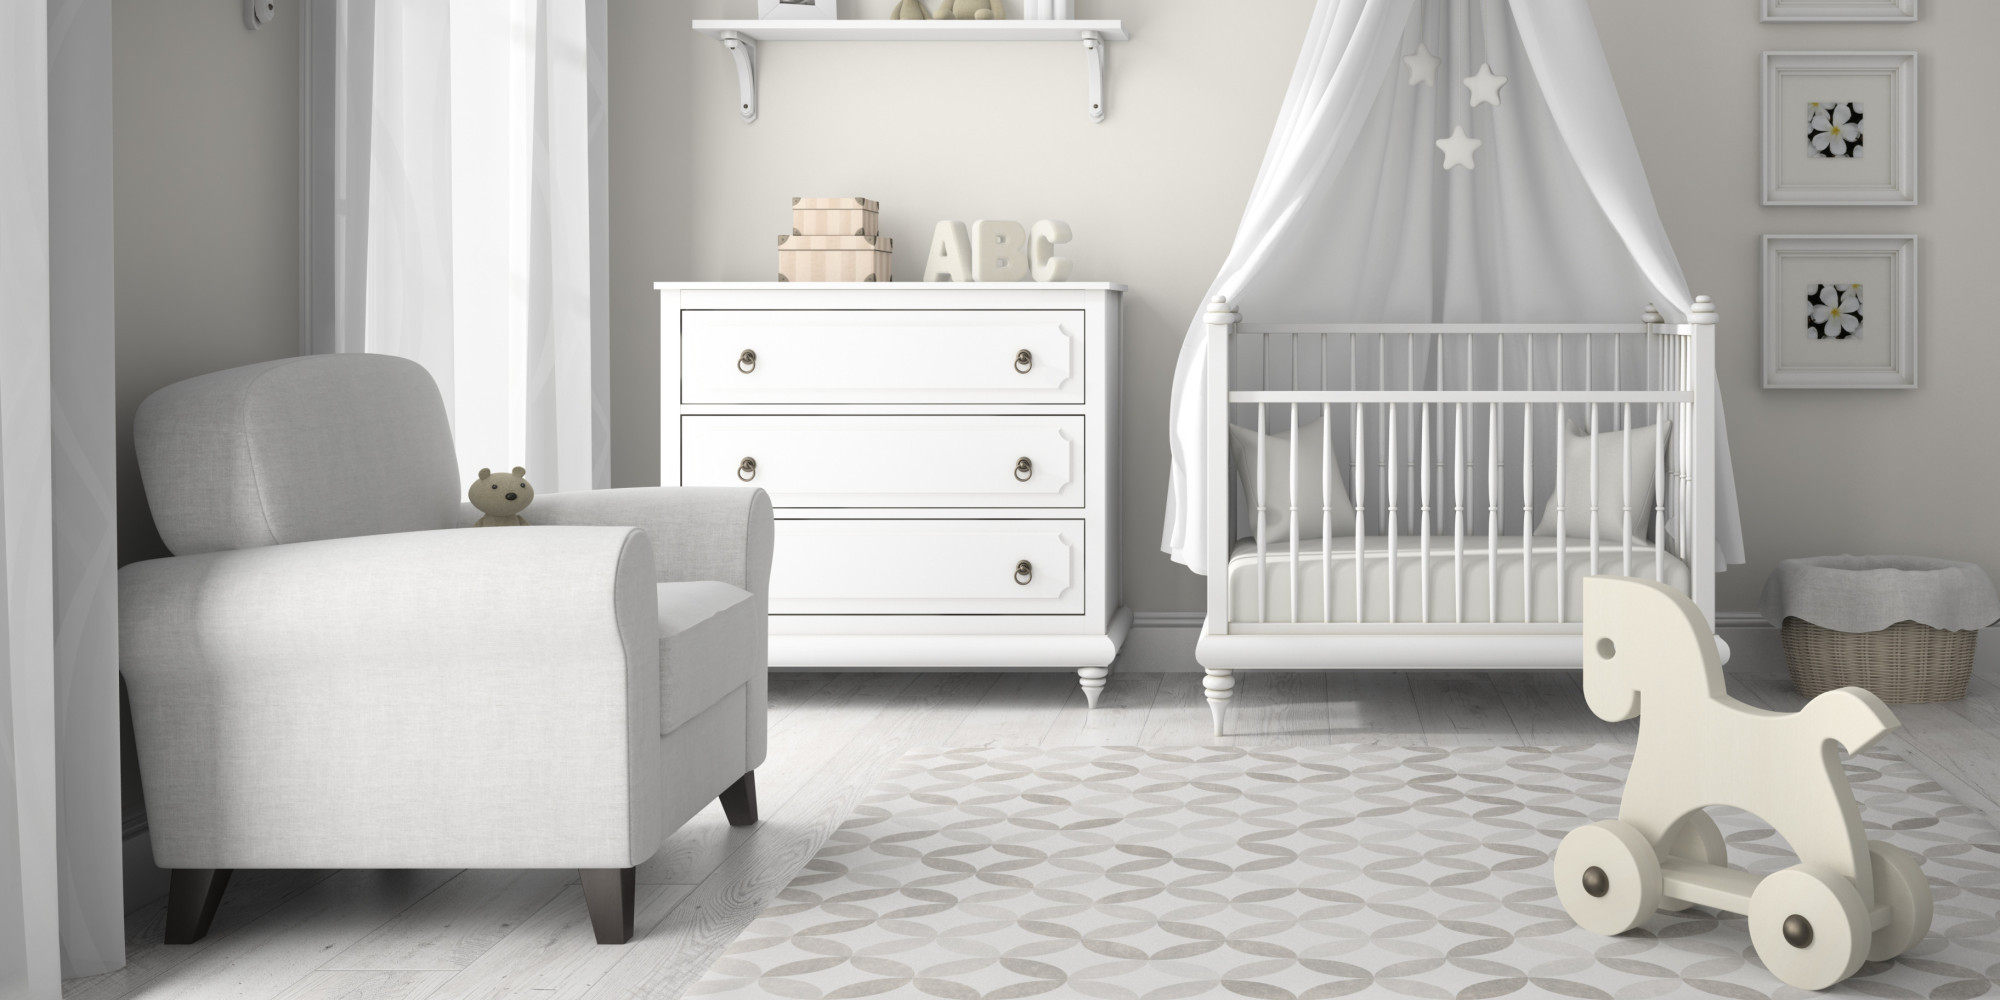 Baby Room Decoration Ideas
 How To Decorate Your Baby s Nursery In A Day